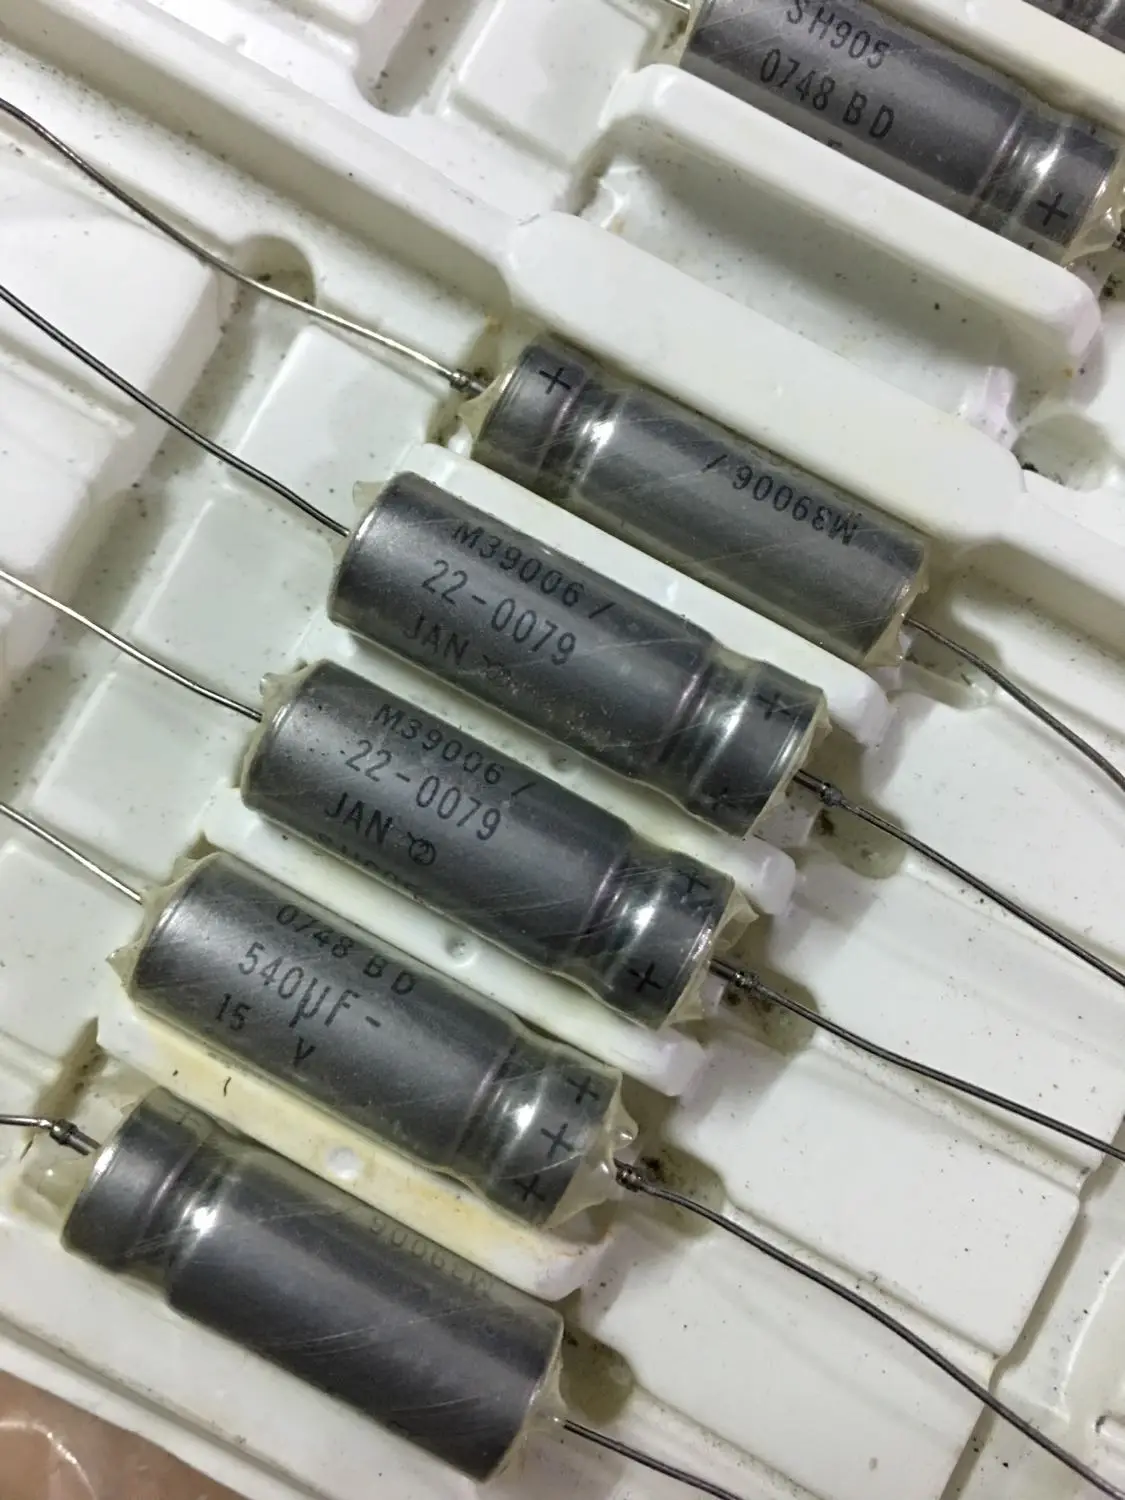 2pcs 4pcs 10pcs sprague 53d 35v4700uf 23x55mm axial filter electrolytic capacitor ucc 4700uf 35vdc made in usa 4700uf 35v 2pcs/10pcs SPRAGUE Axial Silver Capacitor M39006 15V540UF Generation 16v470UF JAN 470 free shipping